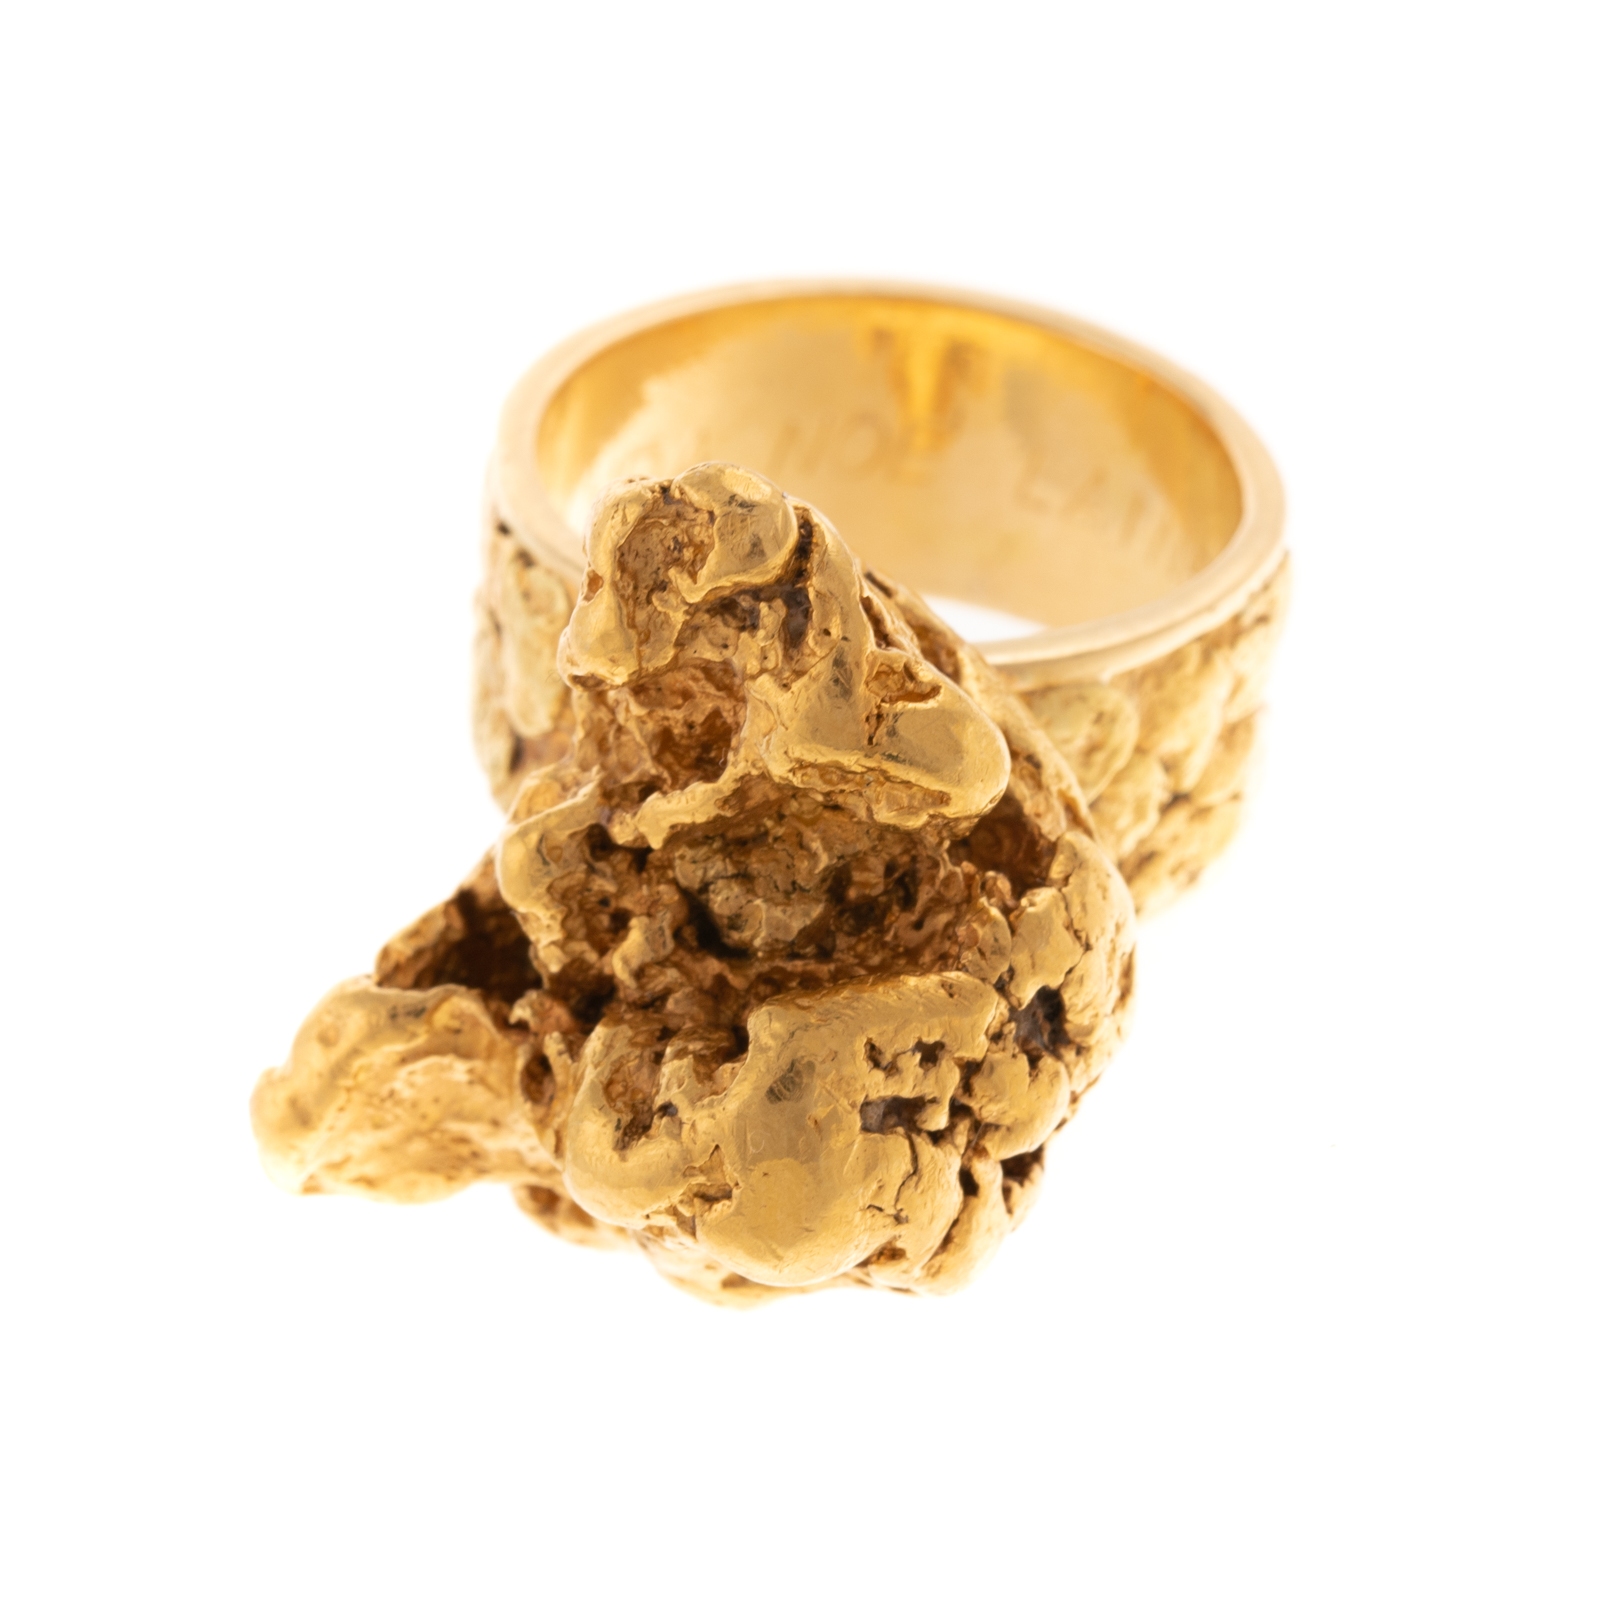 A SOLID 22K YELLOW GOLD NUGGET 3358ba